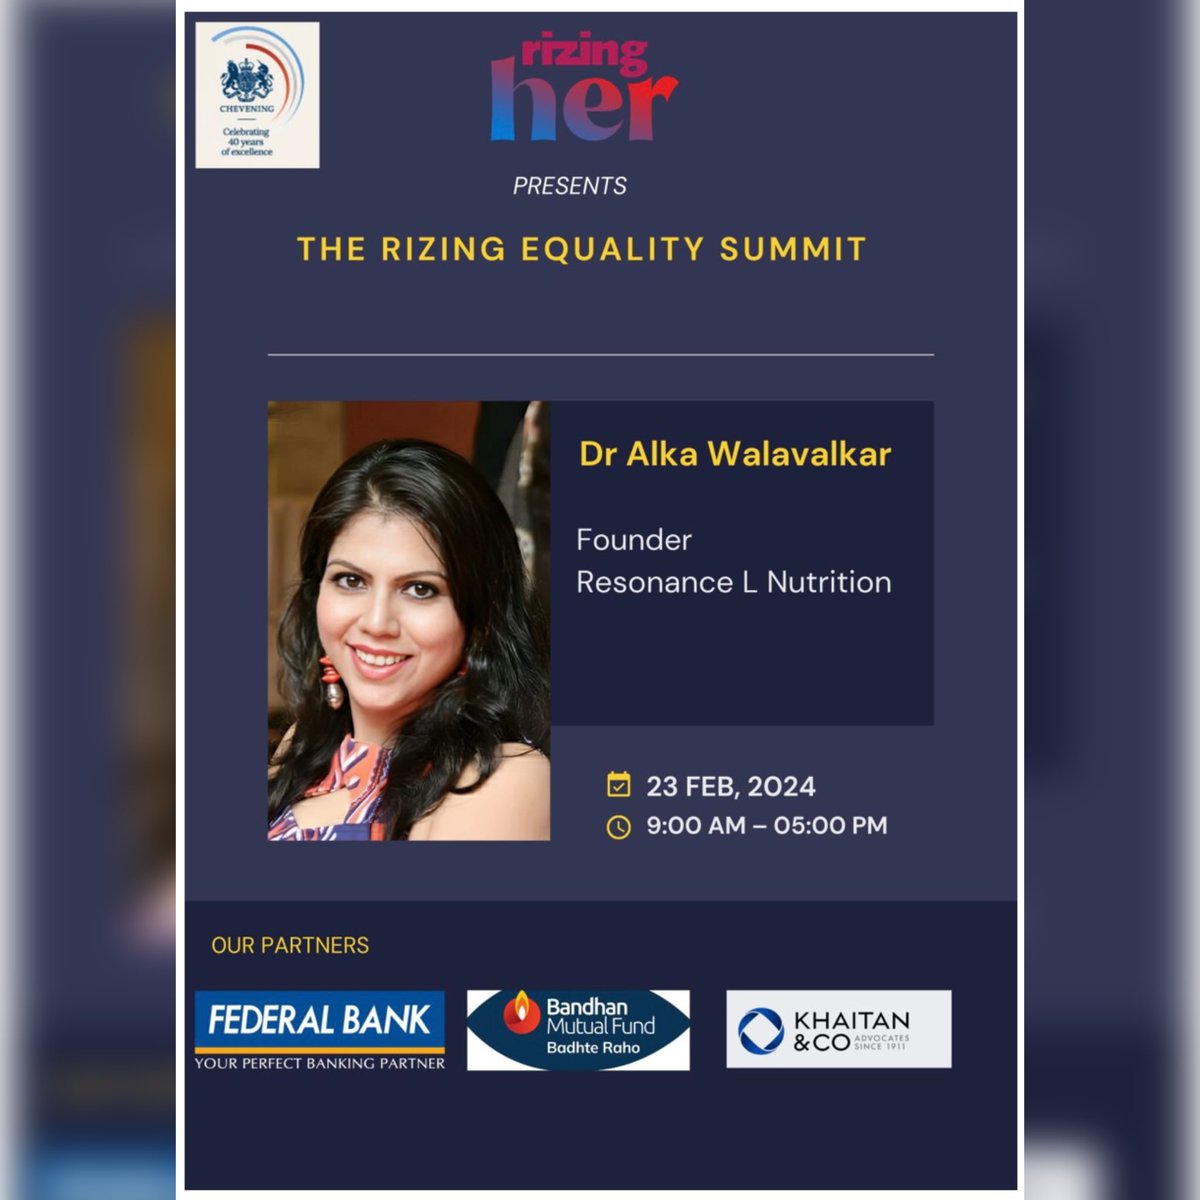 Presenting at The Rizing Equality Summit, which is in partnership with the British High Commission in India and which is bringing together aspiring and current women leaders, entrepreneurs, experts, investors and more. #DrAlkaWalavalkar #Resonance #dralkasResonance